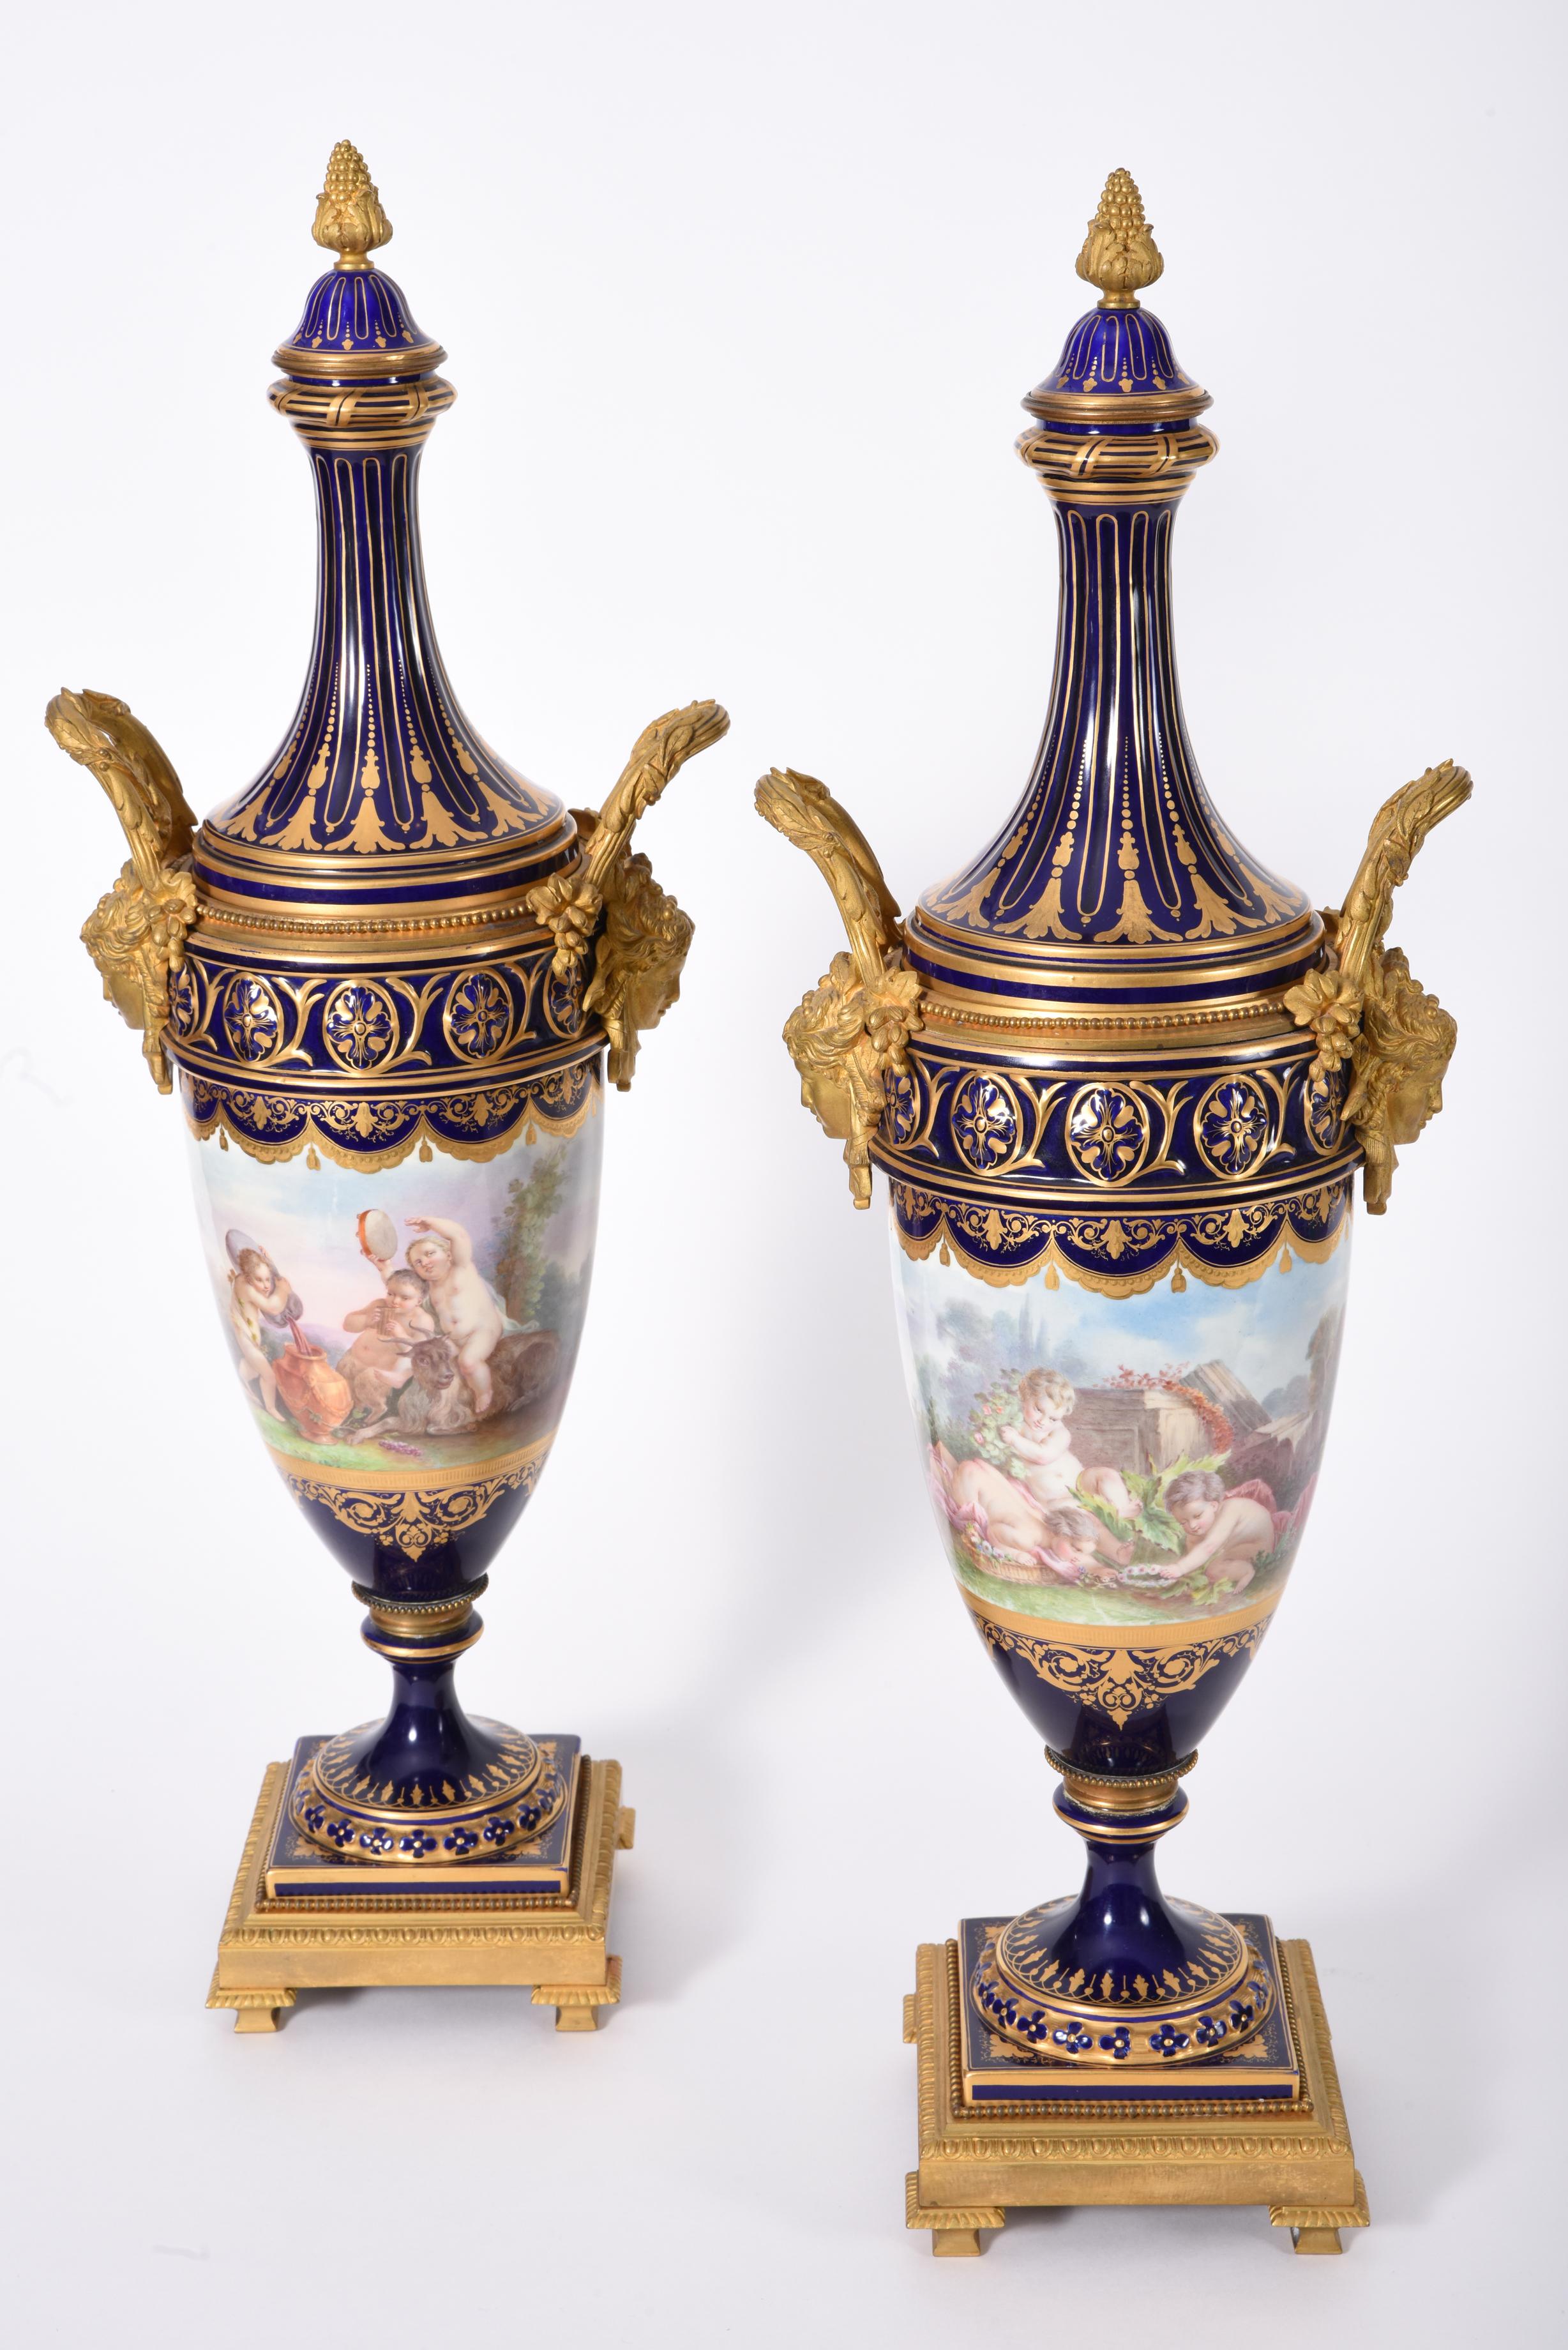 Early 19th Century Matching Pair of Bronze Mounted Porcelain Urns (Französisch)